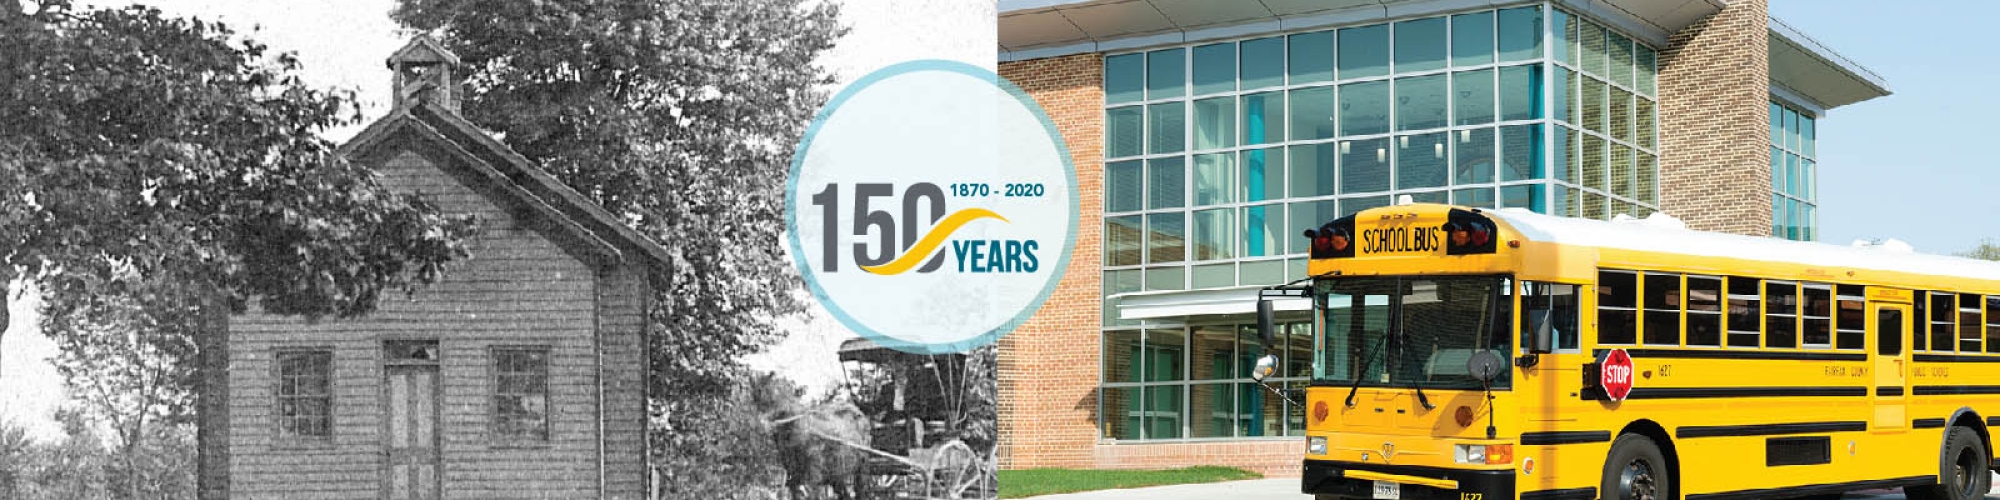 150 Anniversary image - two views of school with student transportation, one old and one new